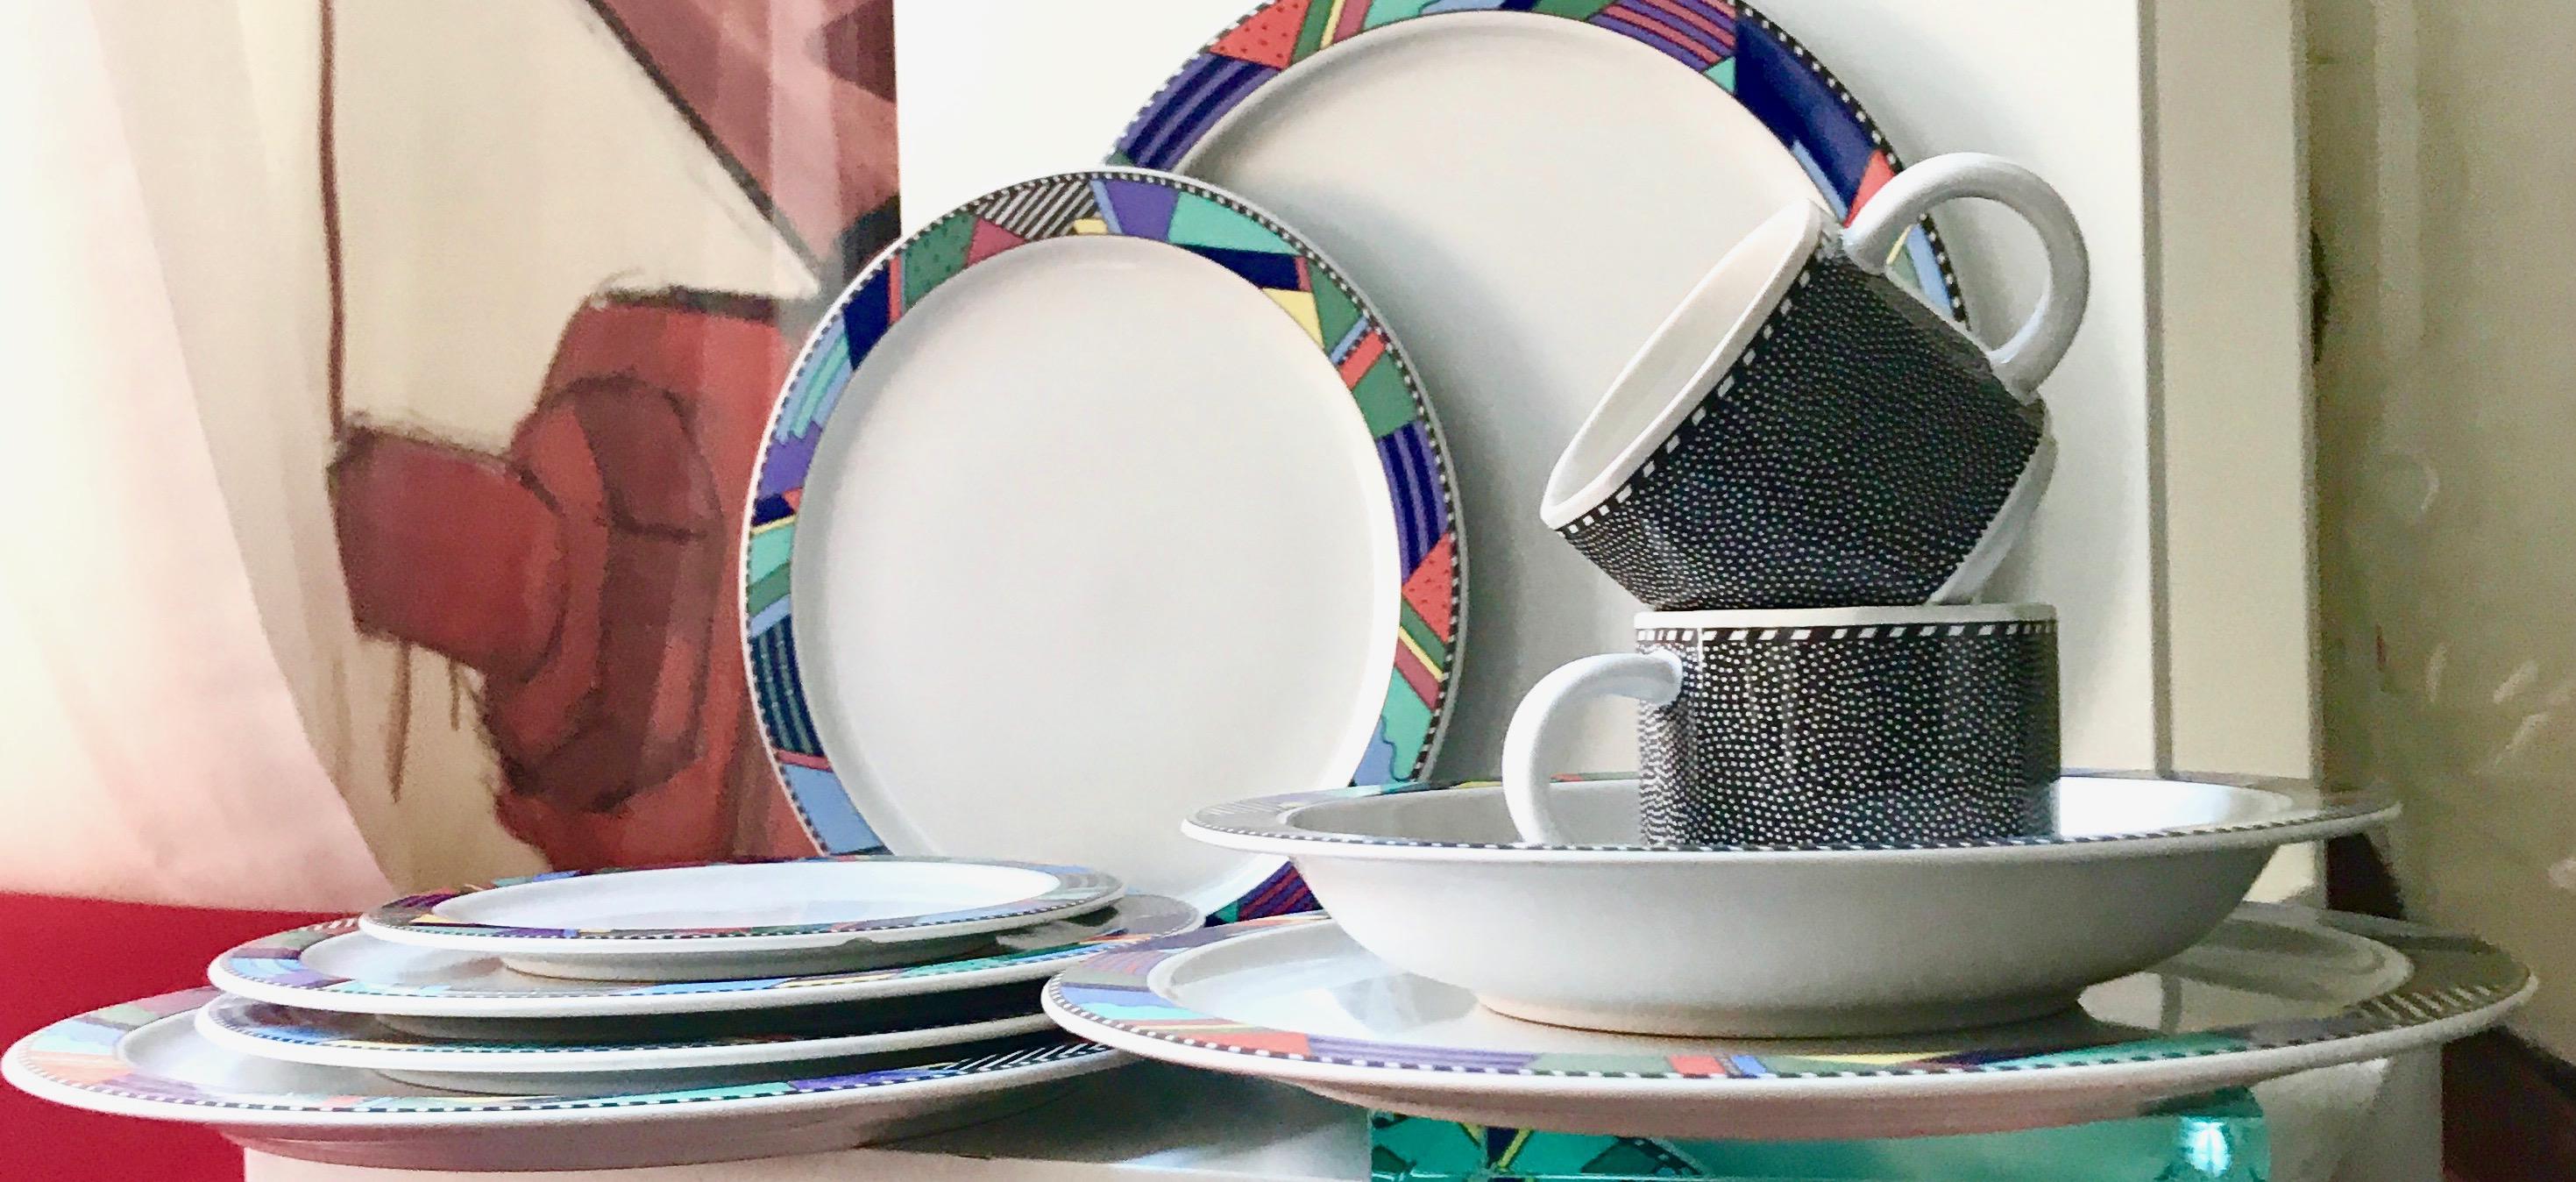 Starter set of the iconic postmodern Rosenthal Studio line collection by Barbara Brenner (1990). Set includes 11 pieces as follows:

3 dinner plates 
3 salad plates 
1 bread and vegan butter plates 
2 teacups 
2 bowls.